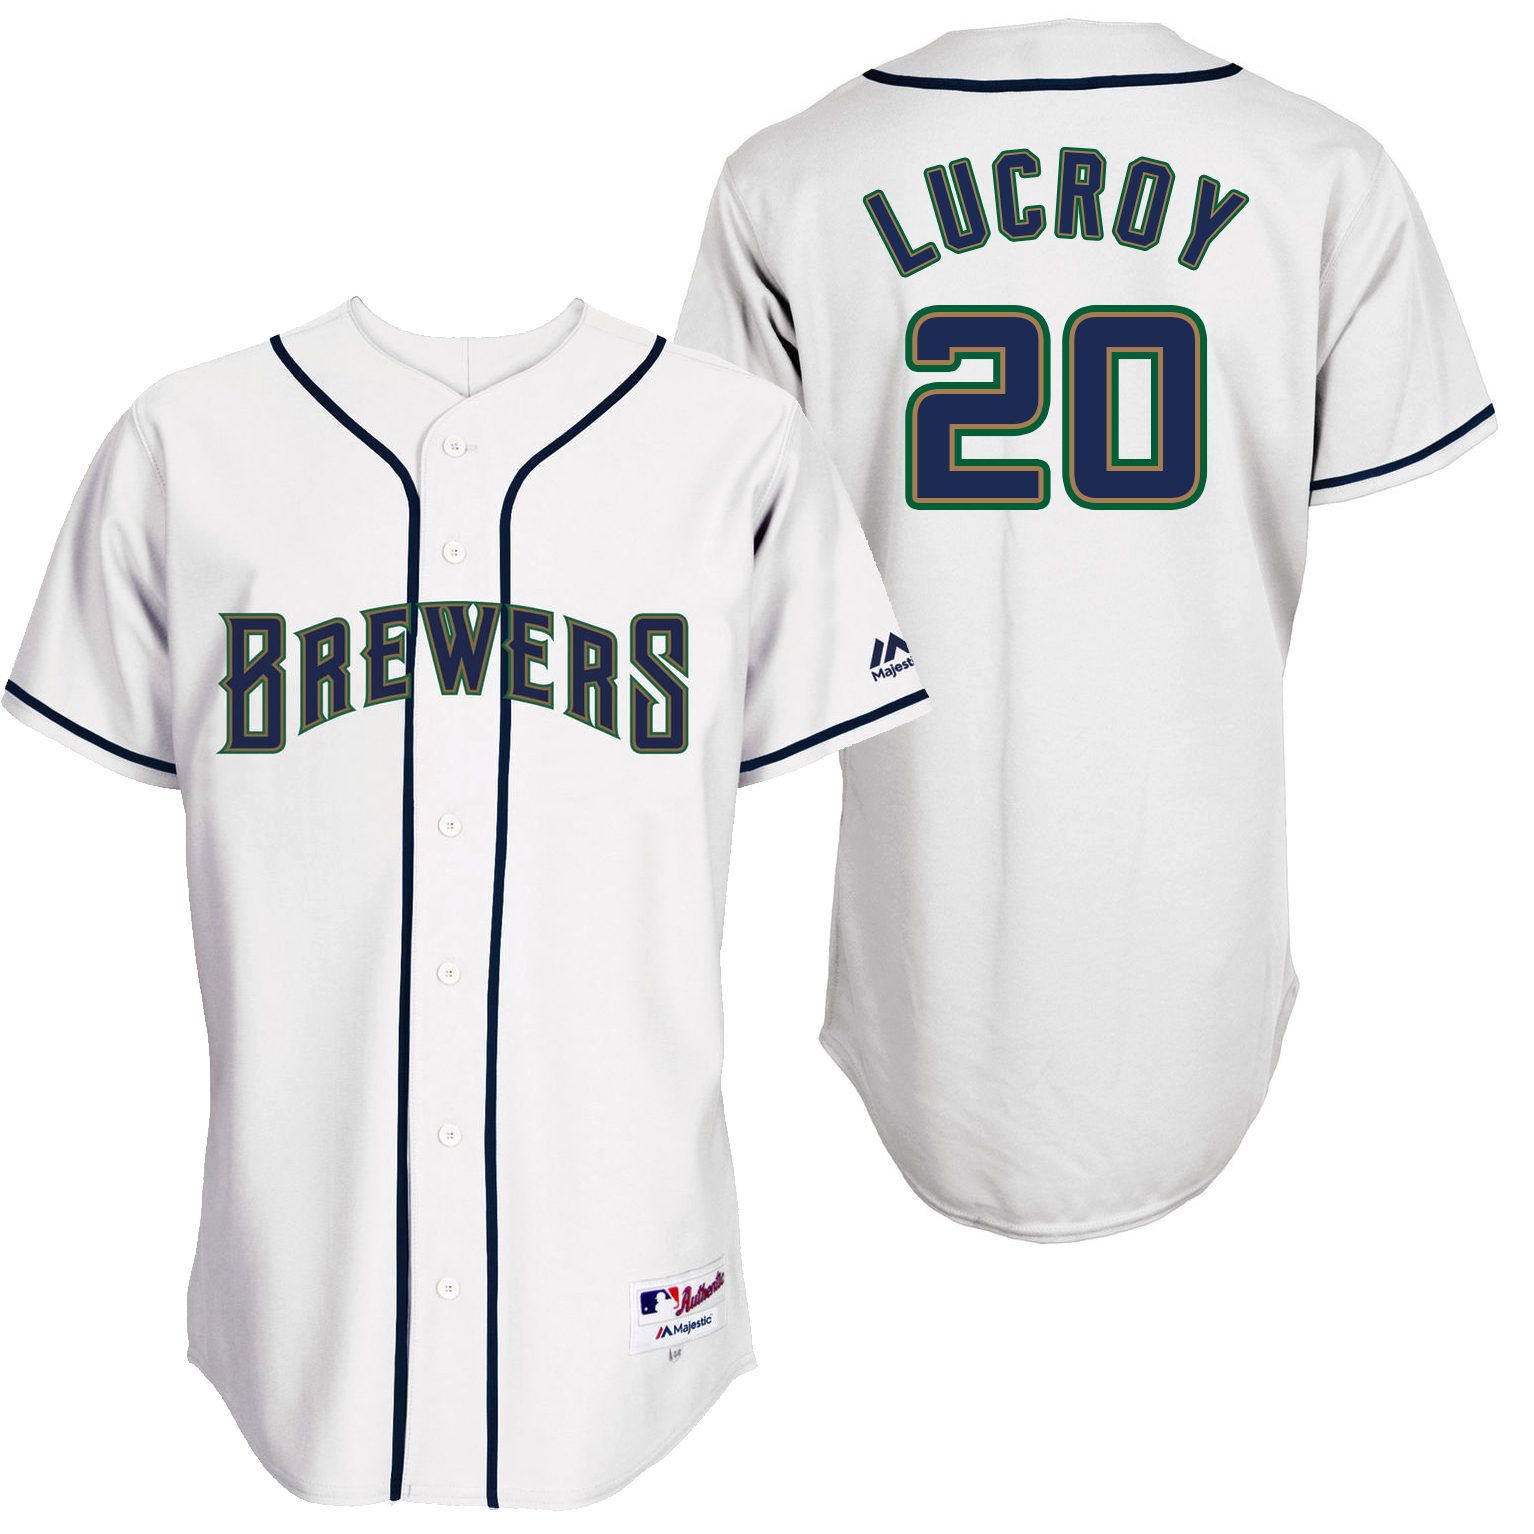 Brewers 20 Jonathan Lucroy White Throwback Jersey